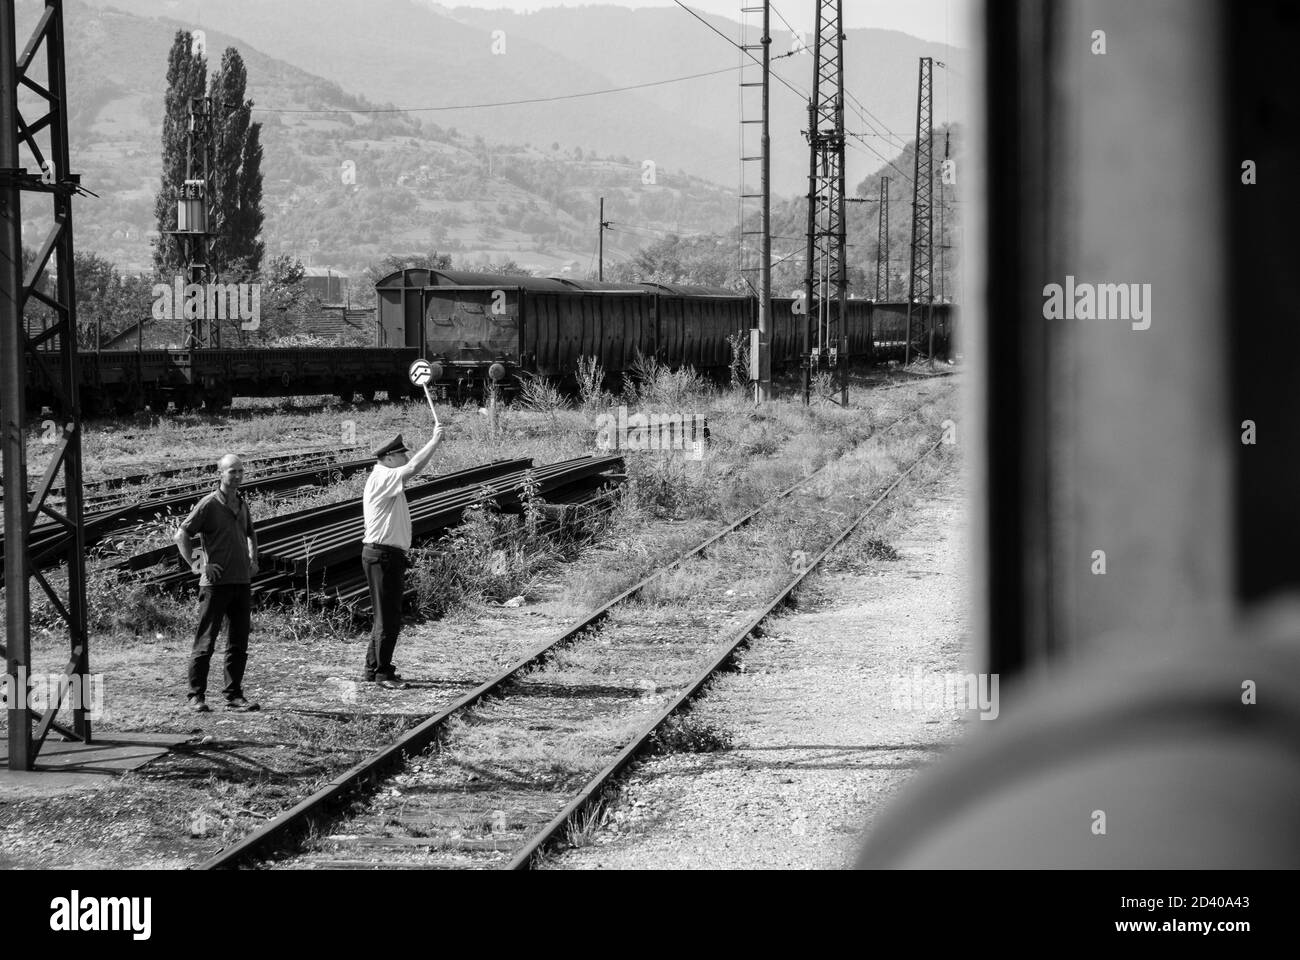 Dispatcher at the train station giving signal to the train Stock Photo